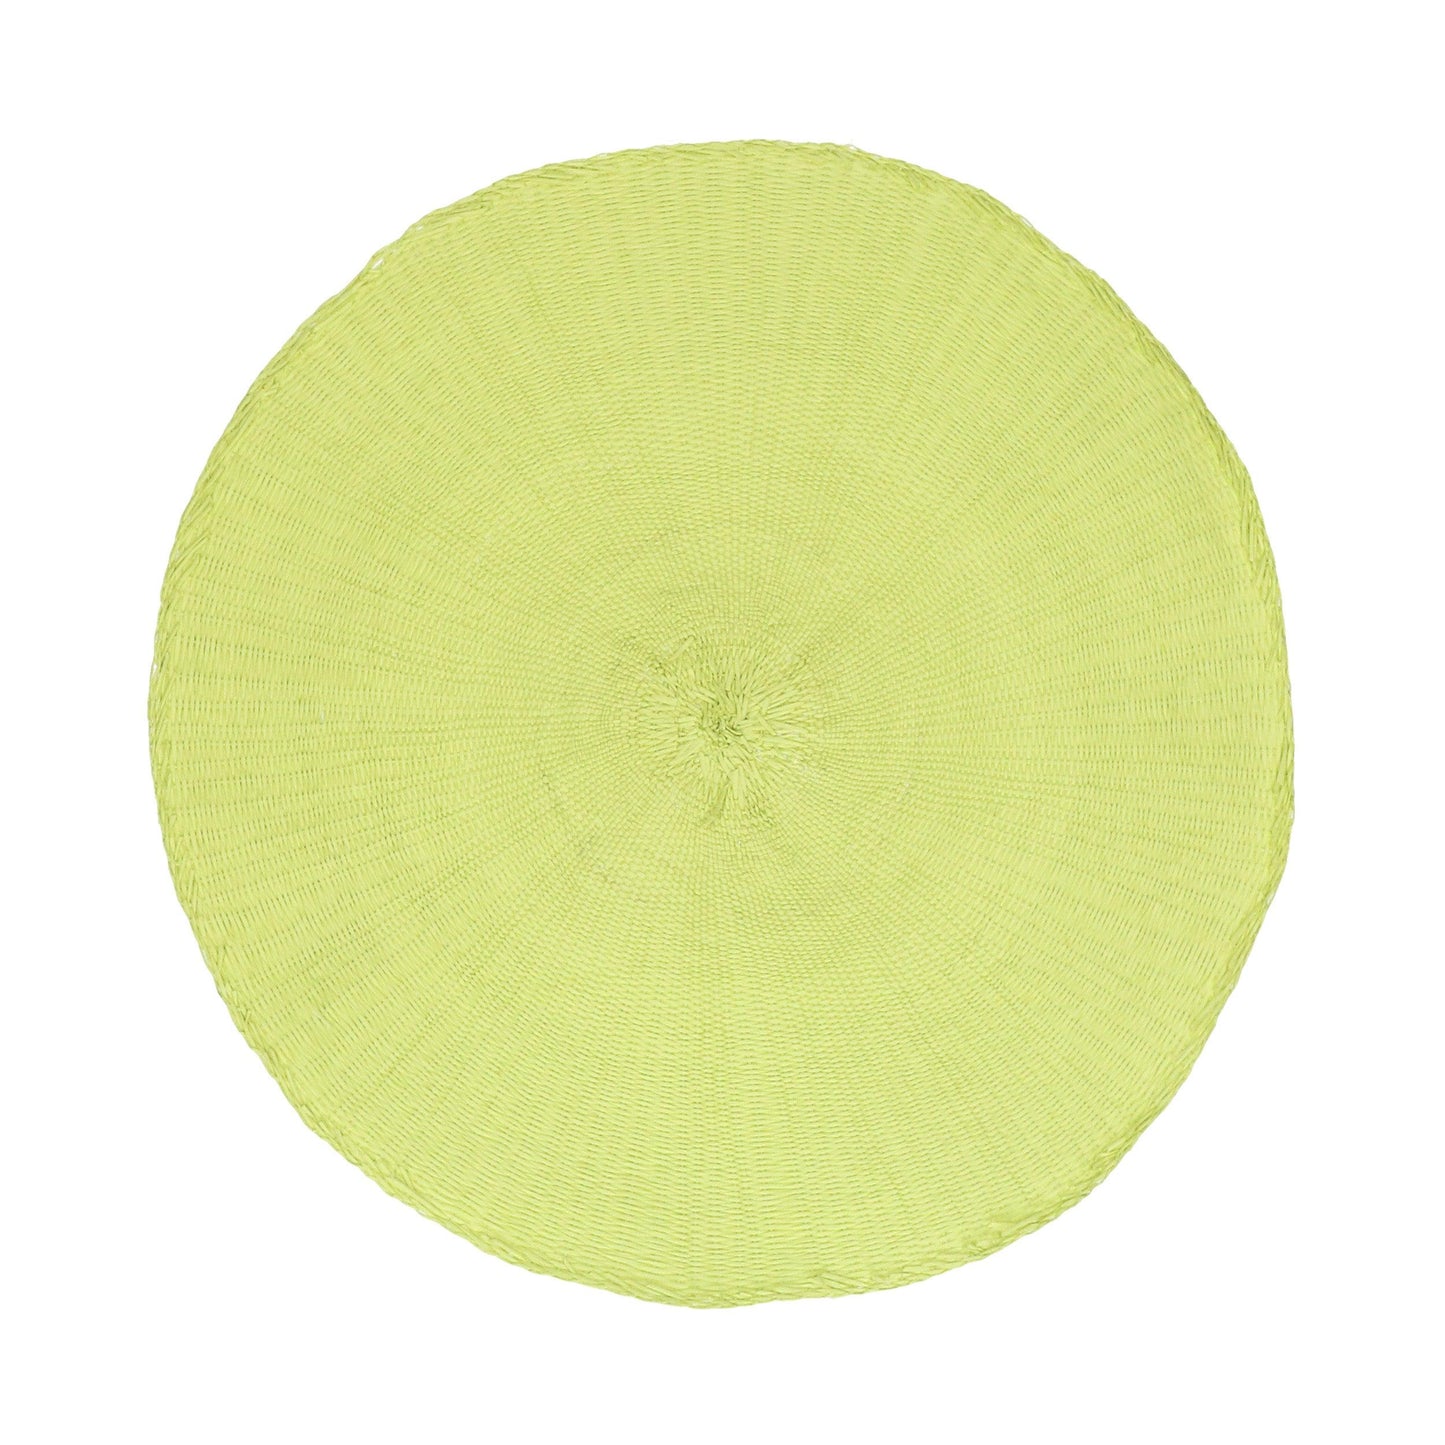 Round Paper Placemat Set (x2)